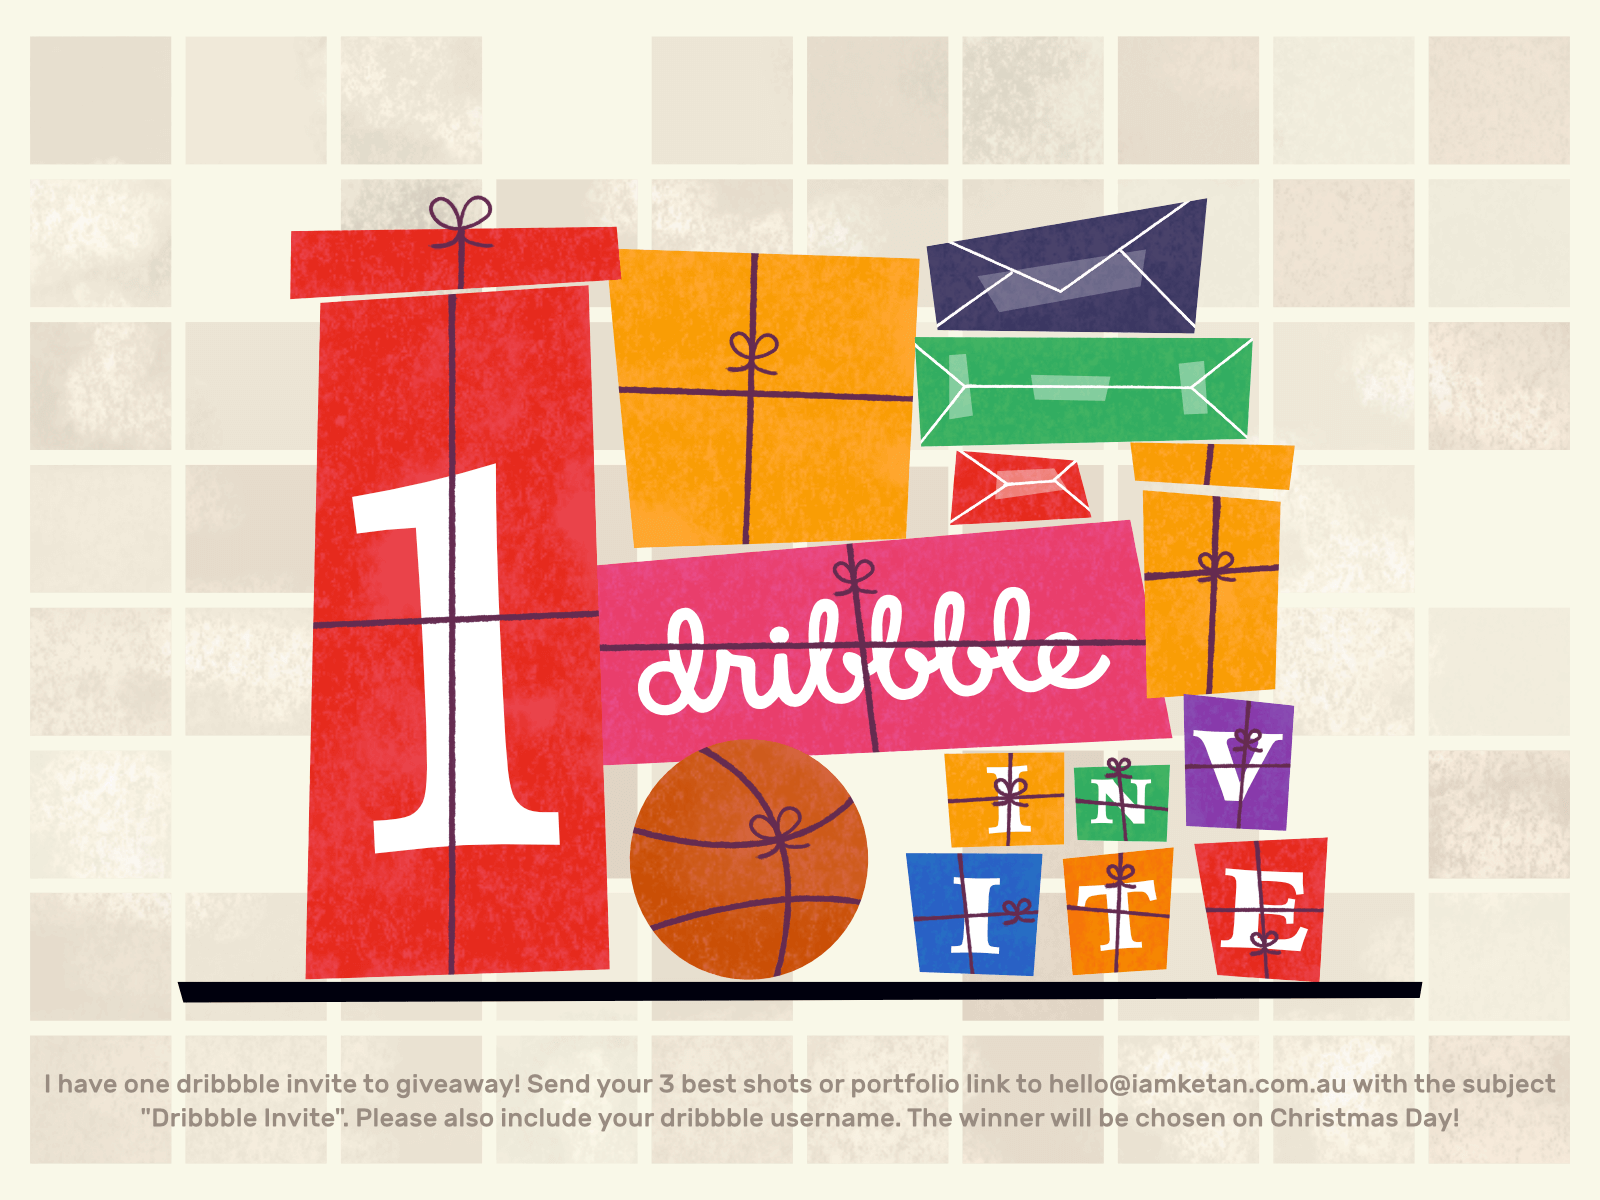 Dribbble shot competition.